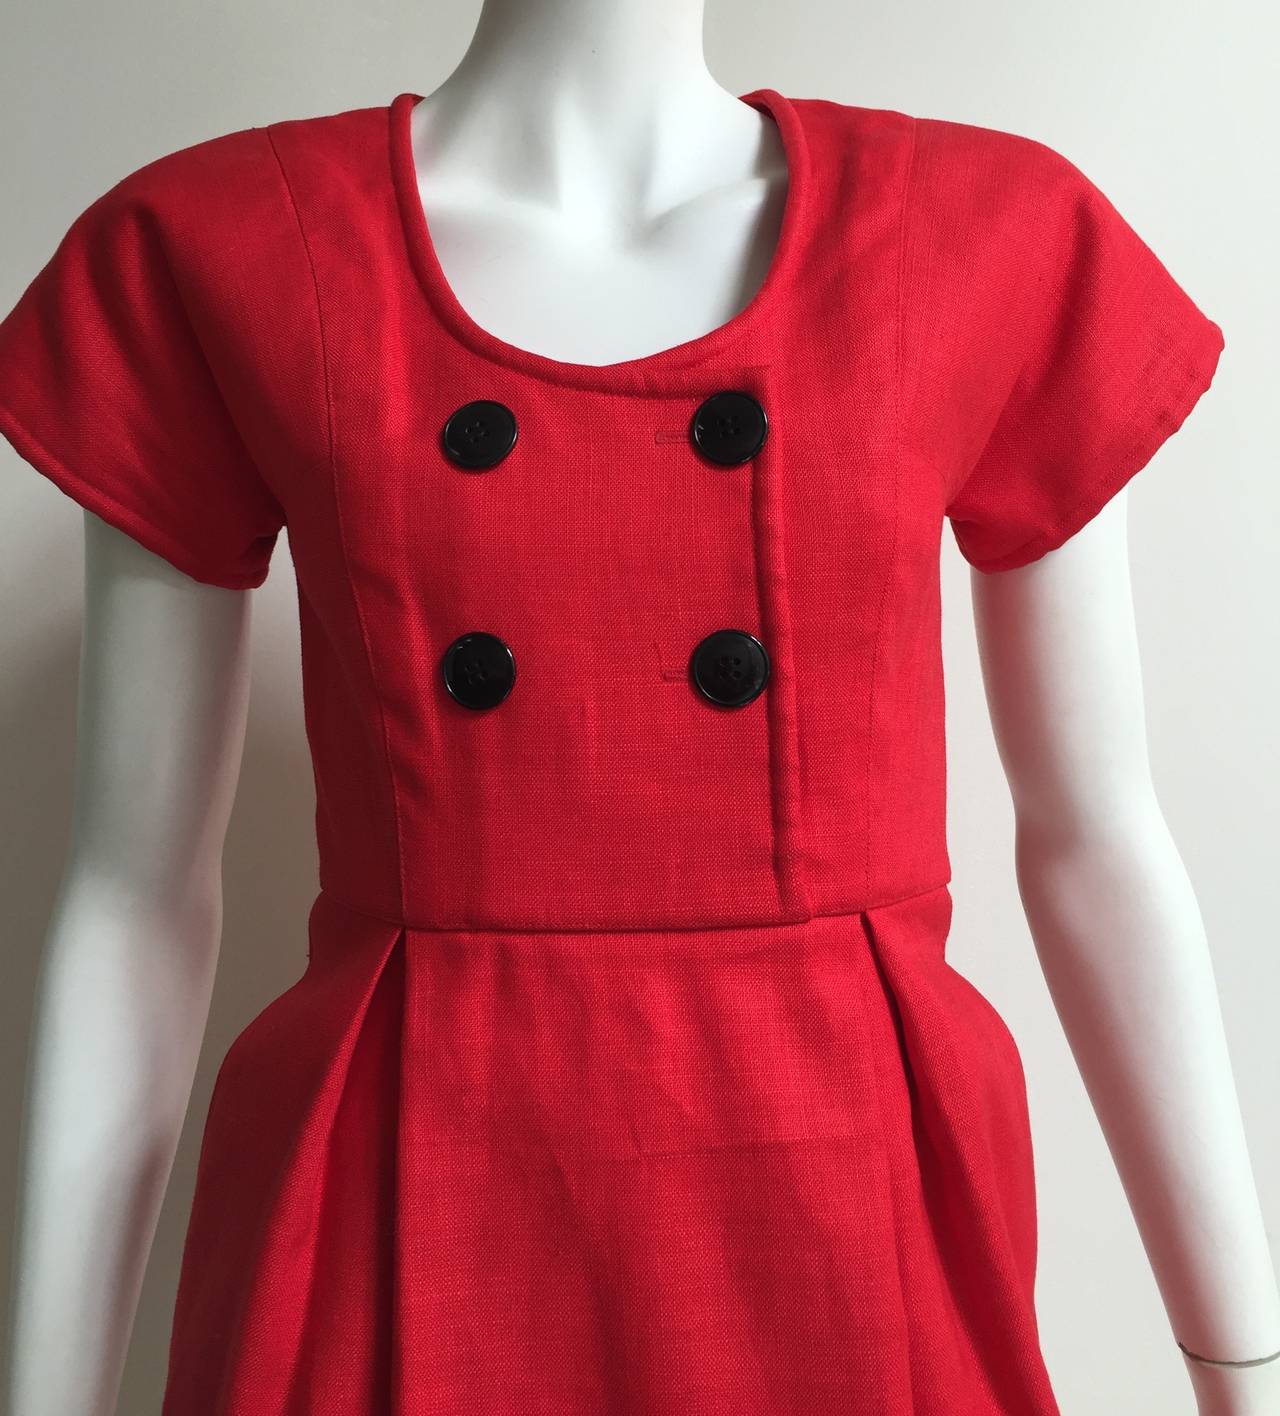 Geoffrey Beene 1970s red linen dress with pockets size 4 was purchased at Neiman Marcus in Houston Texas.  
Silk lining interior. 
The inside of this dress is constructed so beautifully, it really is a piece of art and can't you just see Lee